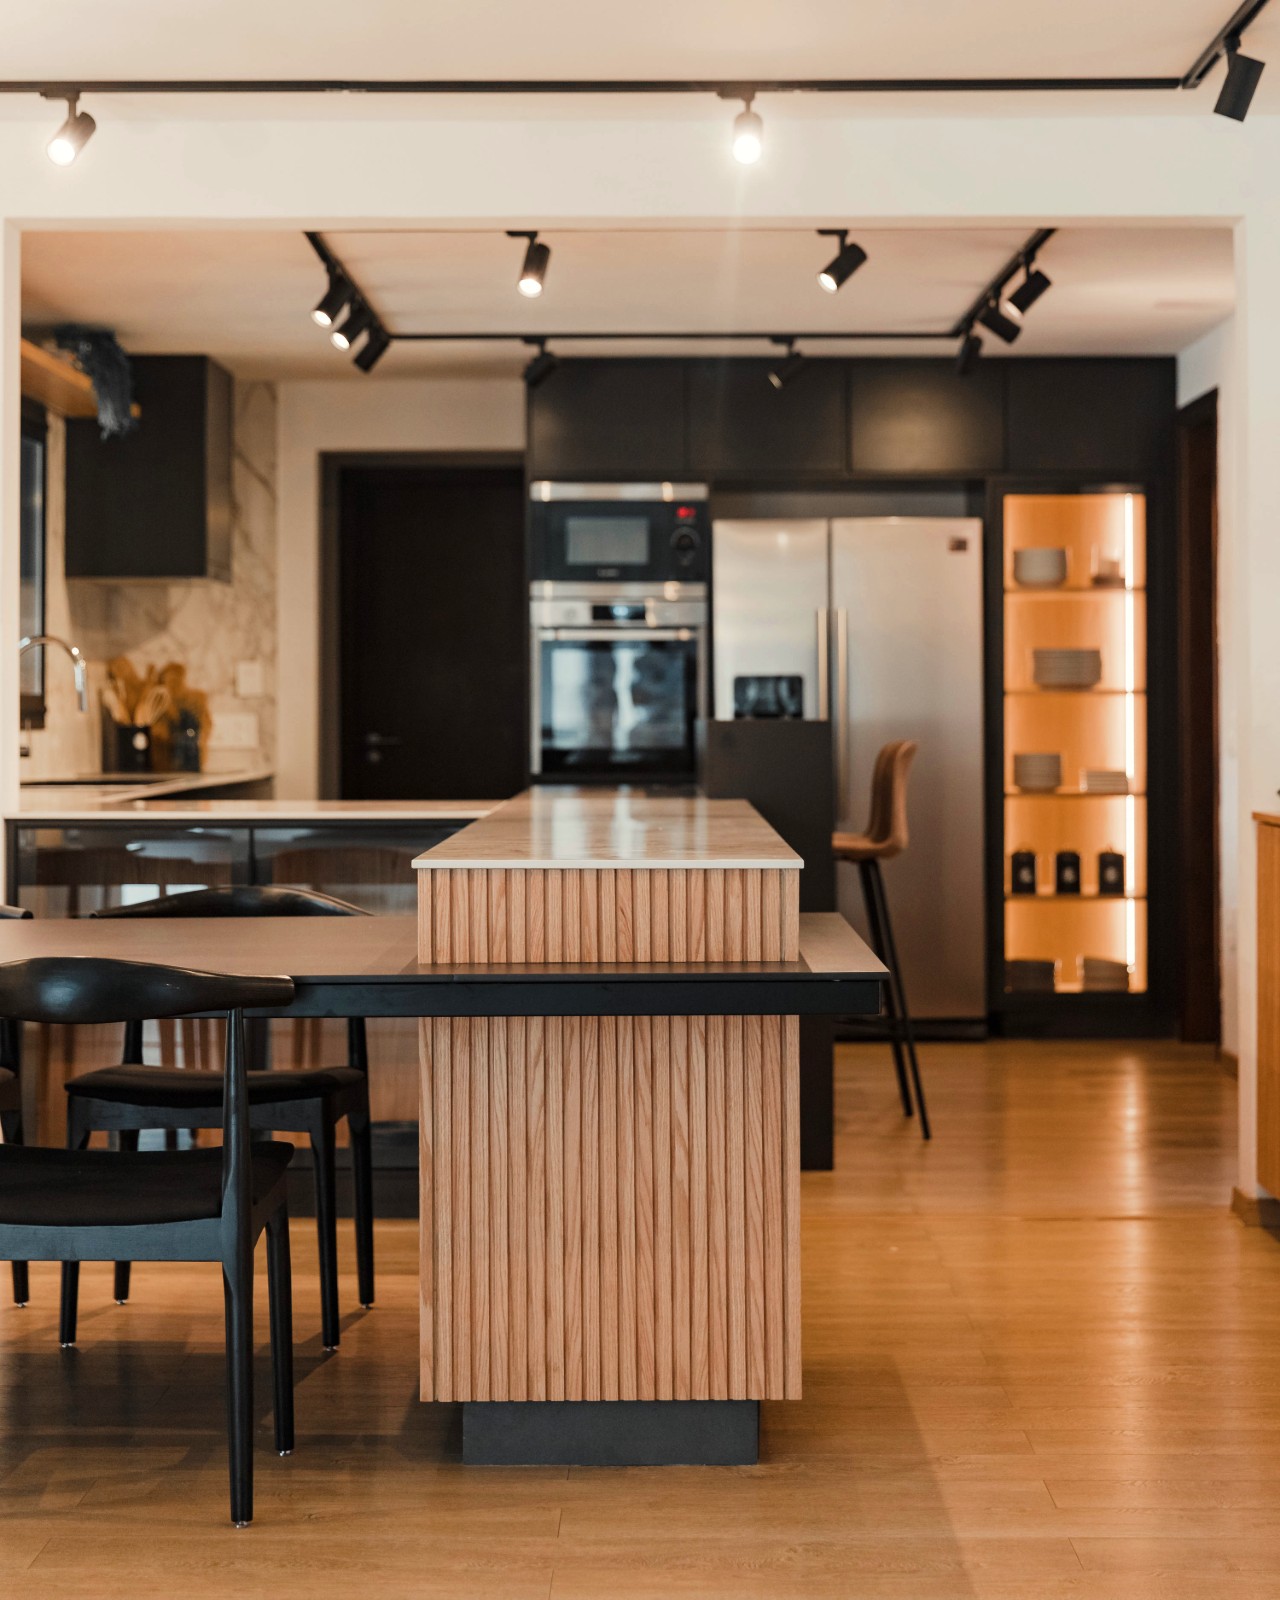 Image of IMG 6684 in Kitchen and dining room merged by a precise design - Cosentino